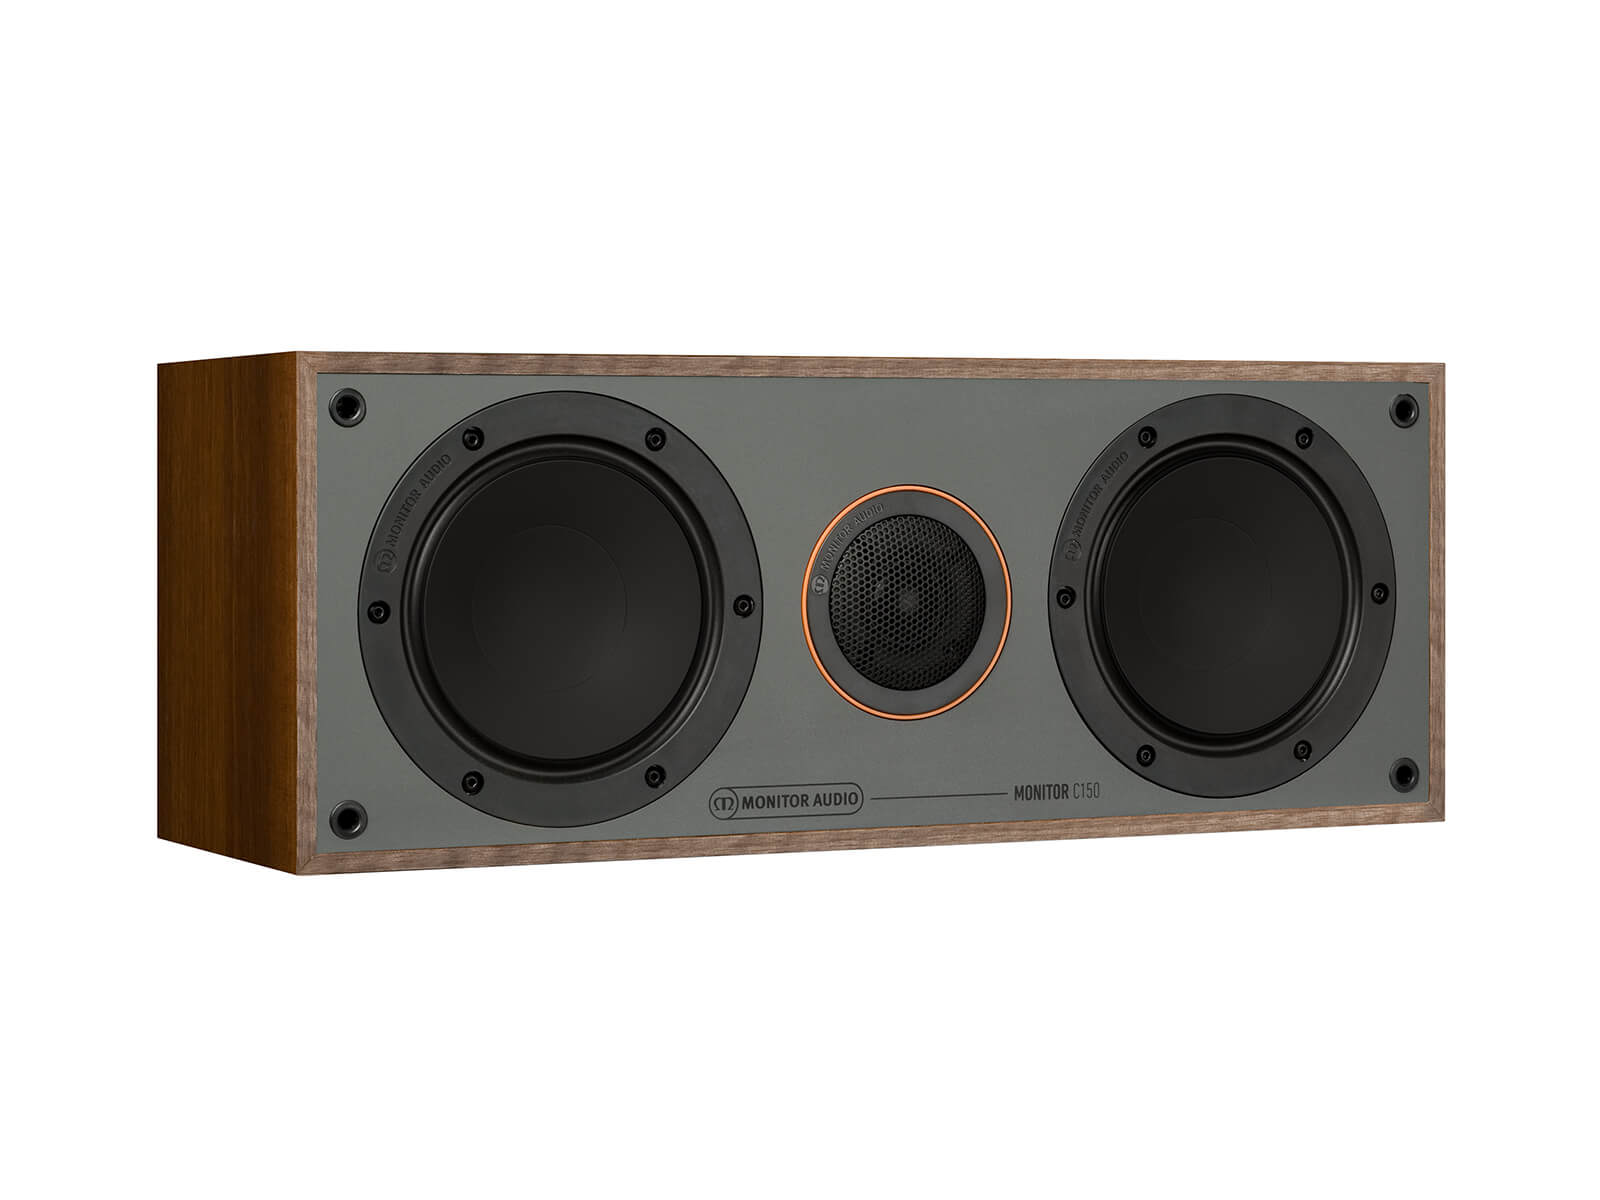 Monitor C150, grille-less centre channel speakers, with a walnut vinyl finish.